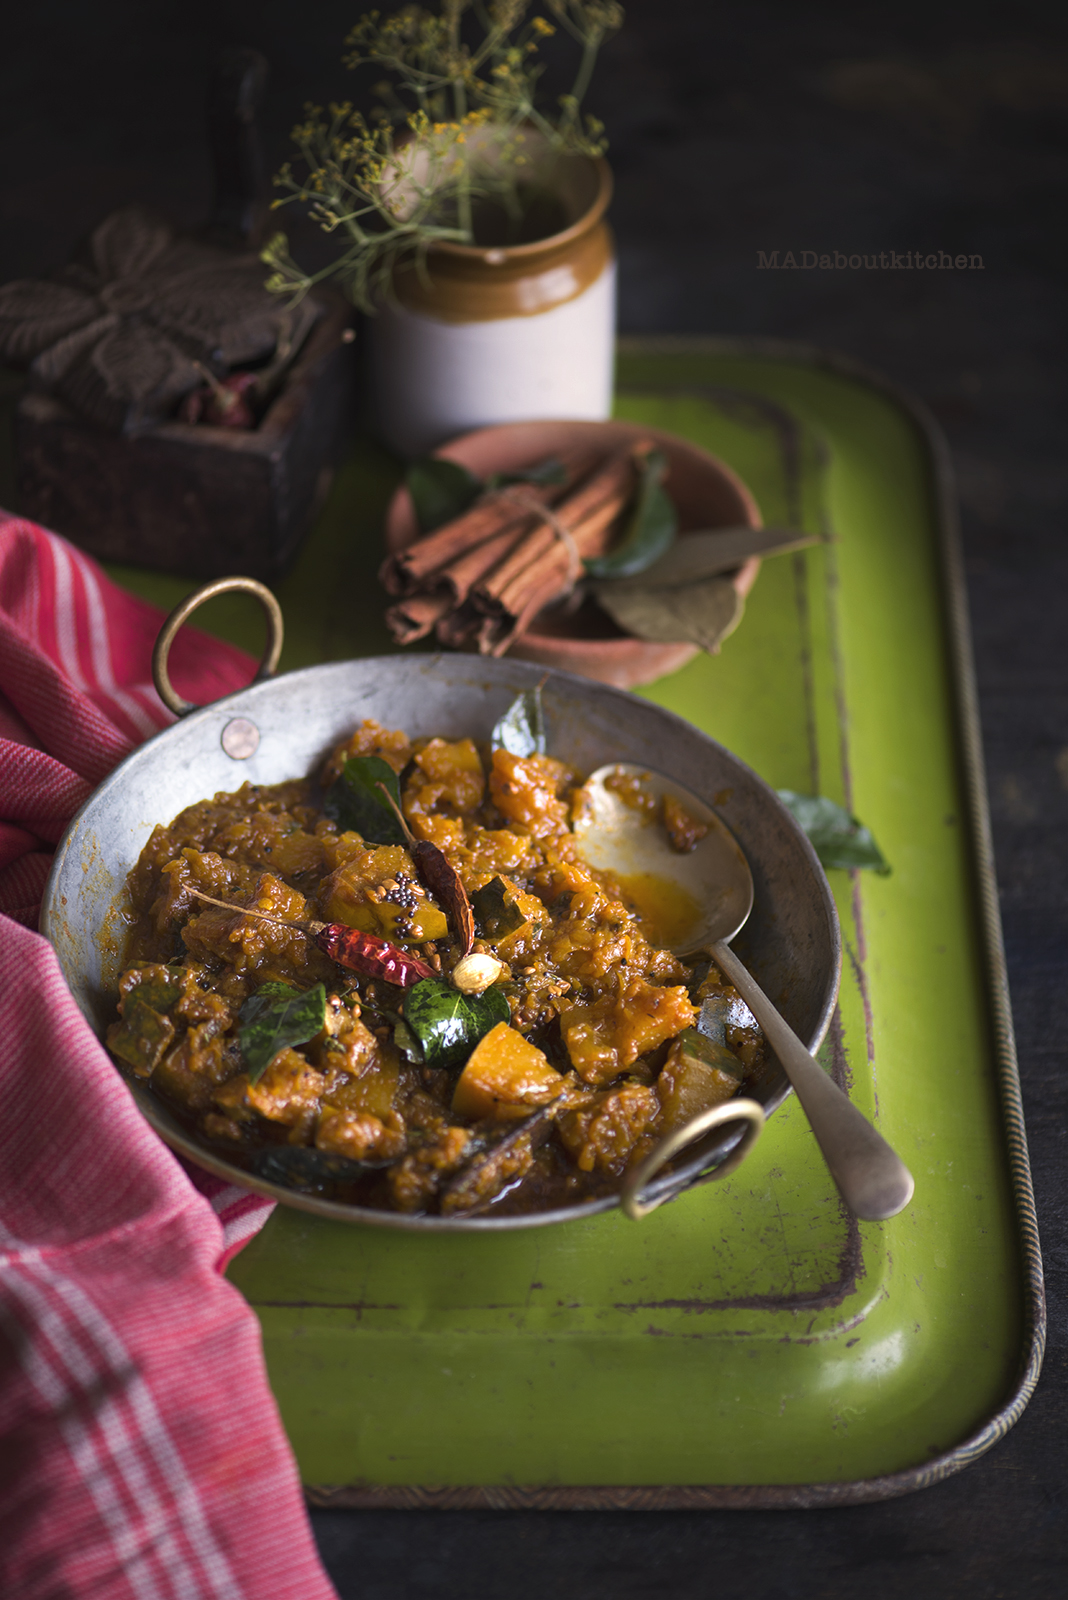 Khatta Meetha Kaddu is an Indian Stir Fry made of Sweet Pumpkin and a whole lot of spices. This stir fry is tangy, sweet and spicy and is usually served with rotis or puris.